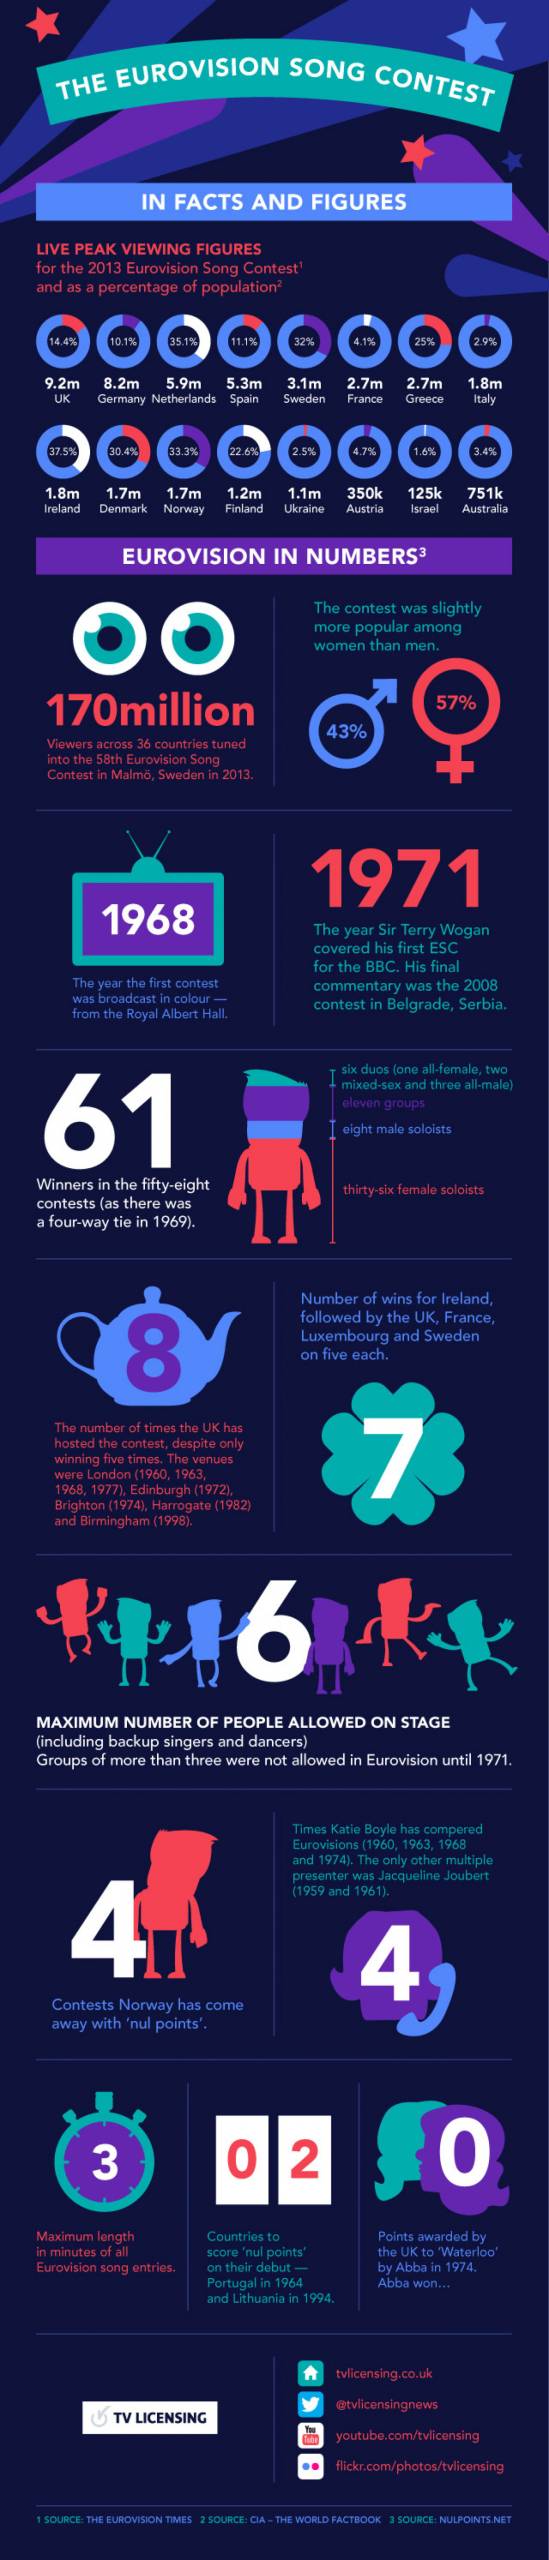 Eurovision facts infograpgic holiday party ideas 1